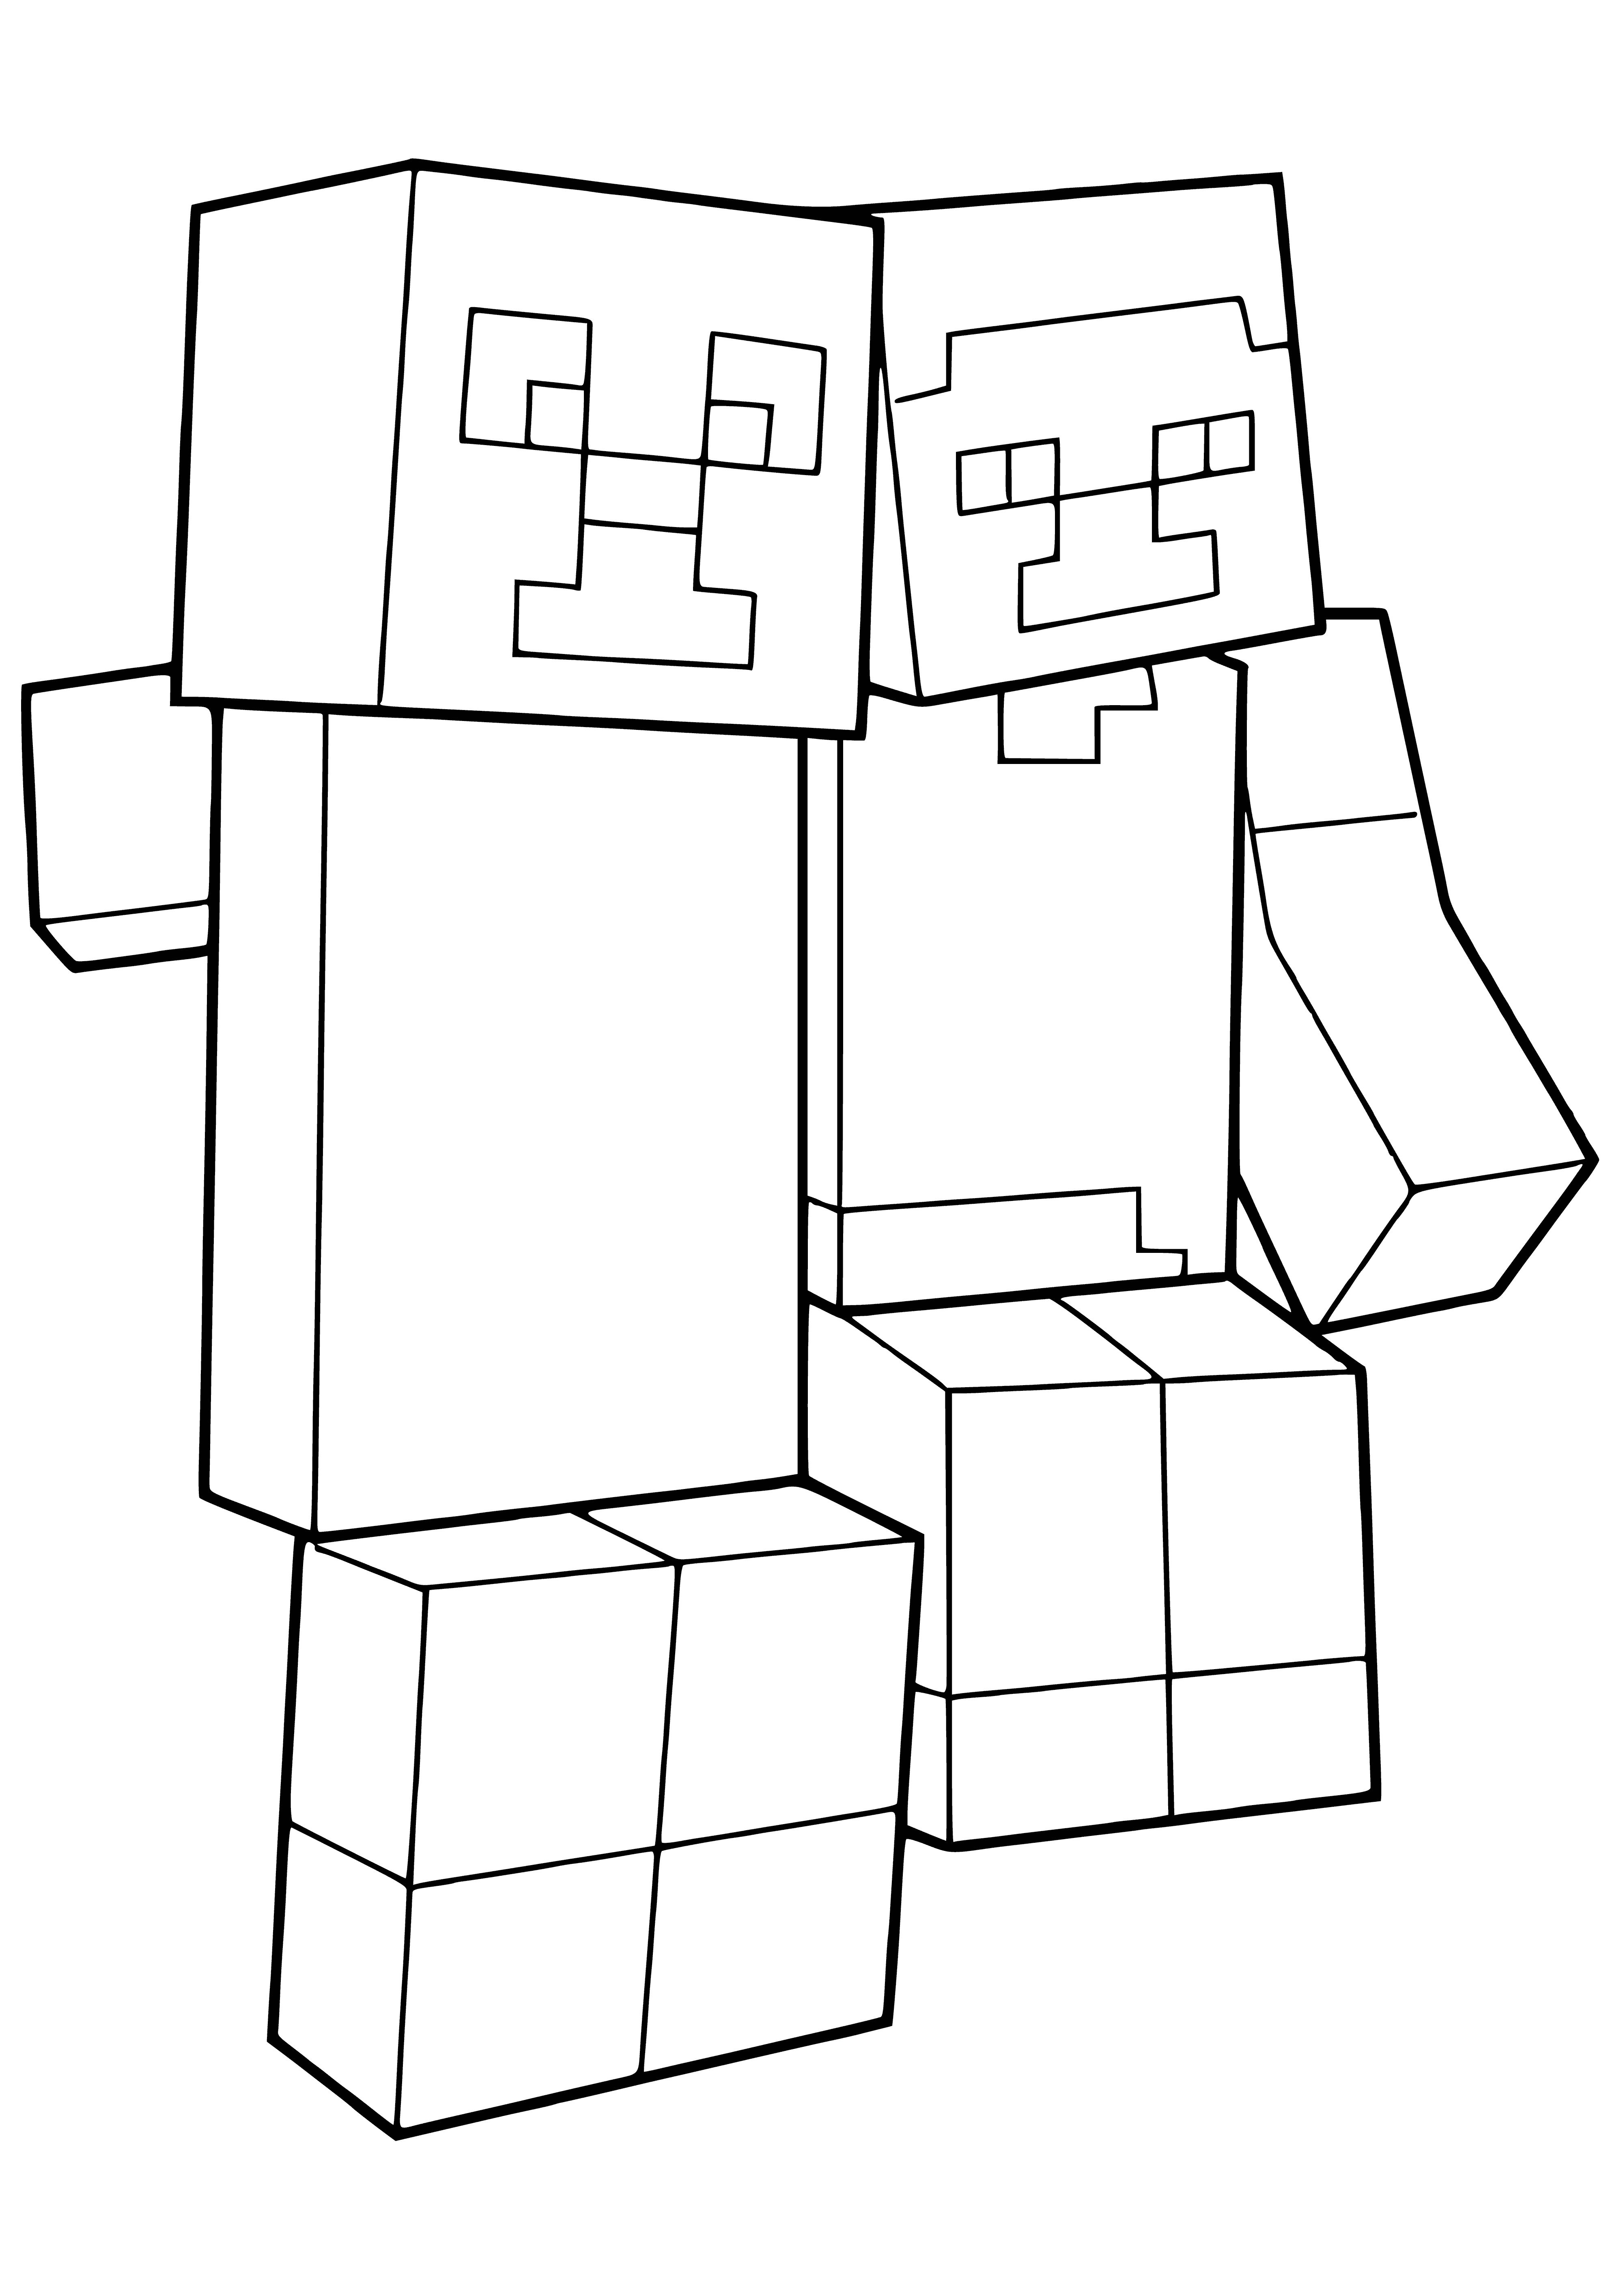 coloring page: Steve, player in Minecraft, is about to swing sword at hostile creeper. He's clad in brown armor and the creeper has bulbous green head.